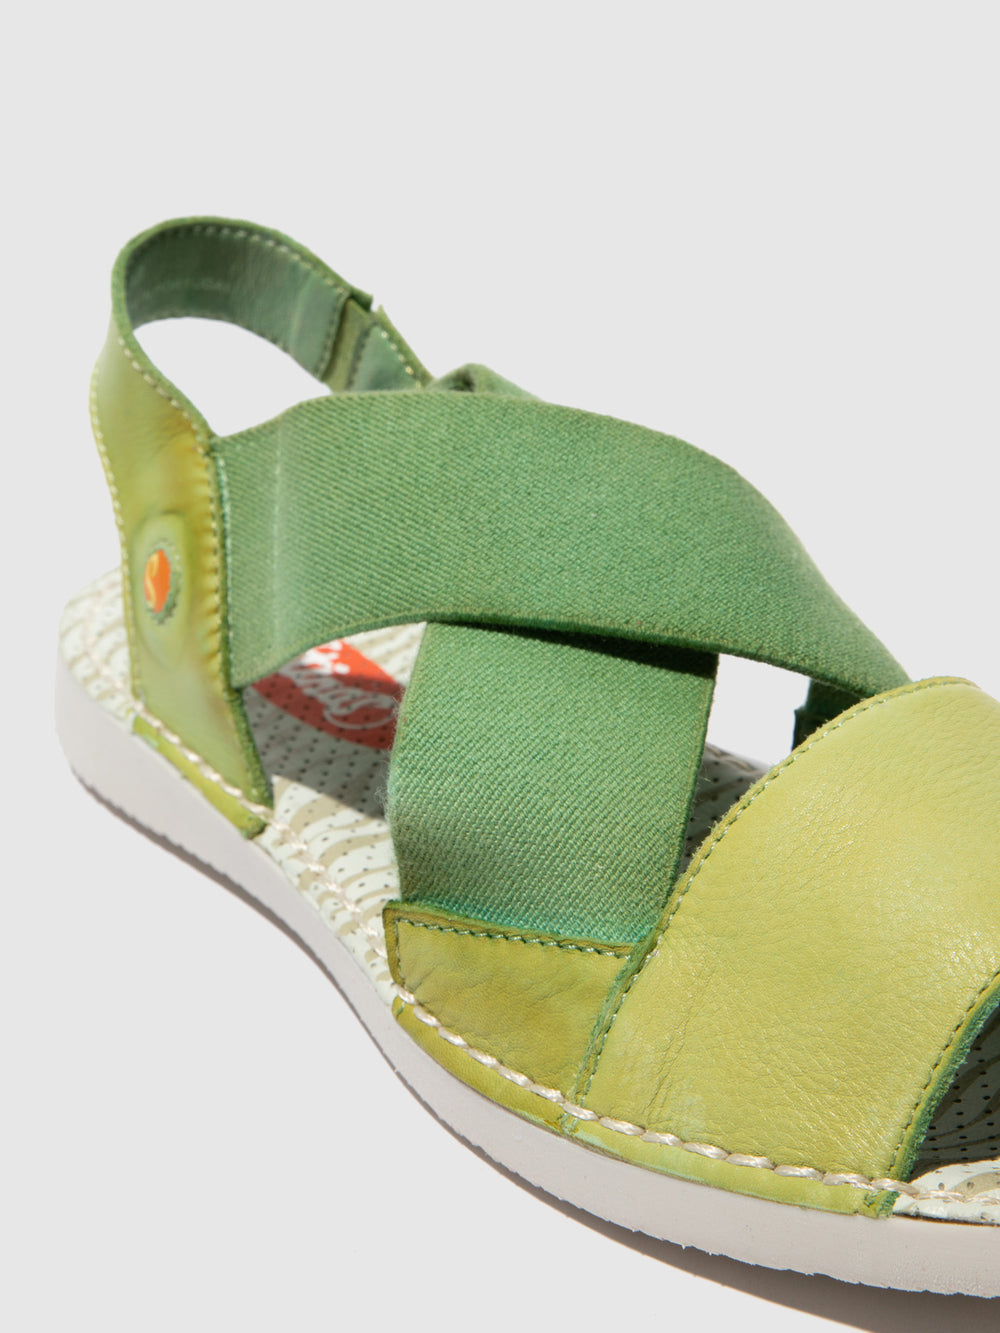 Crossover Sandals TEUL580SOF WASHED APPLE GREEN